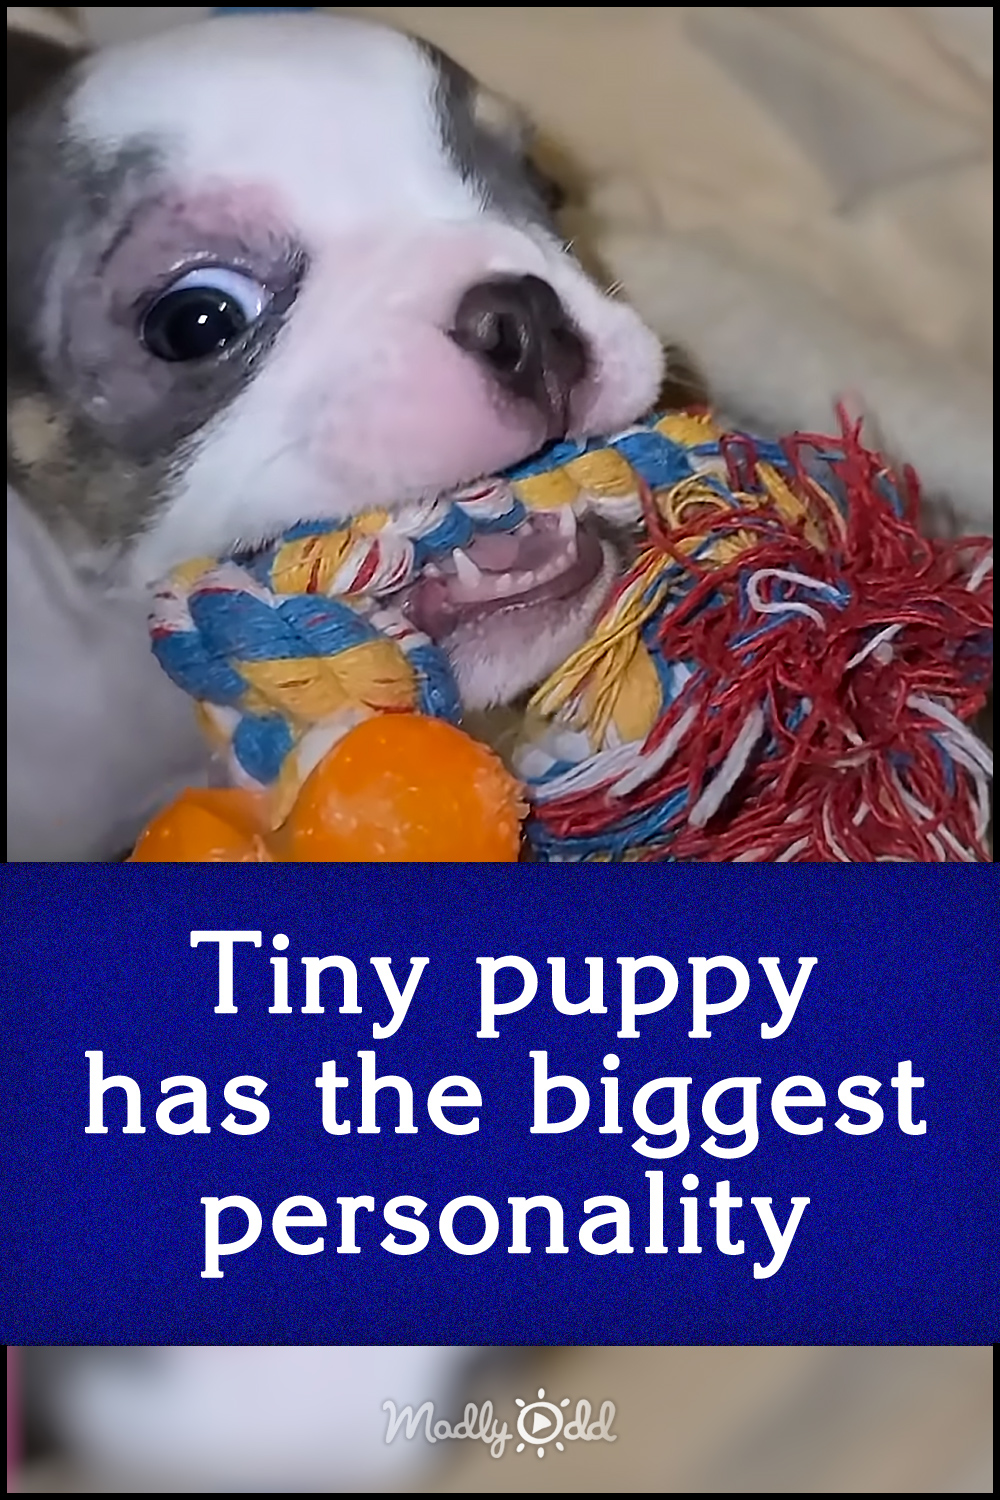 Tiny puppy has the biggest personality